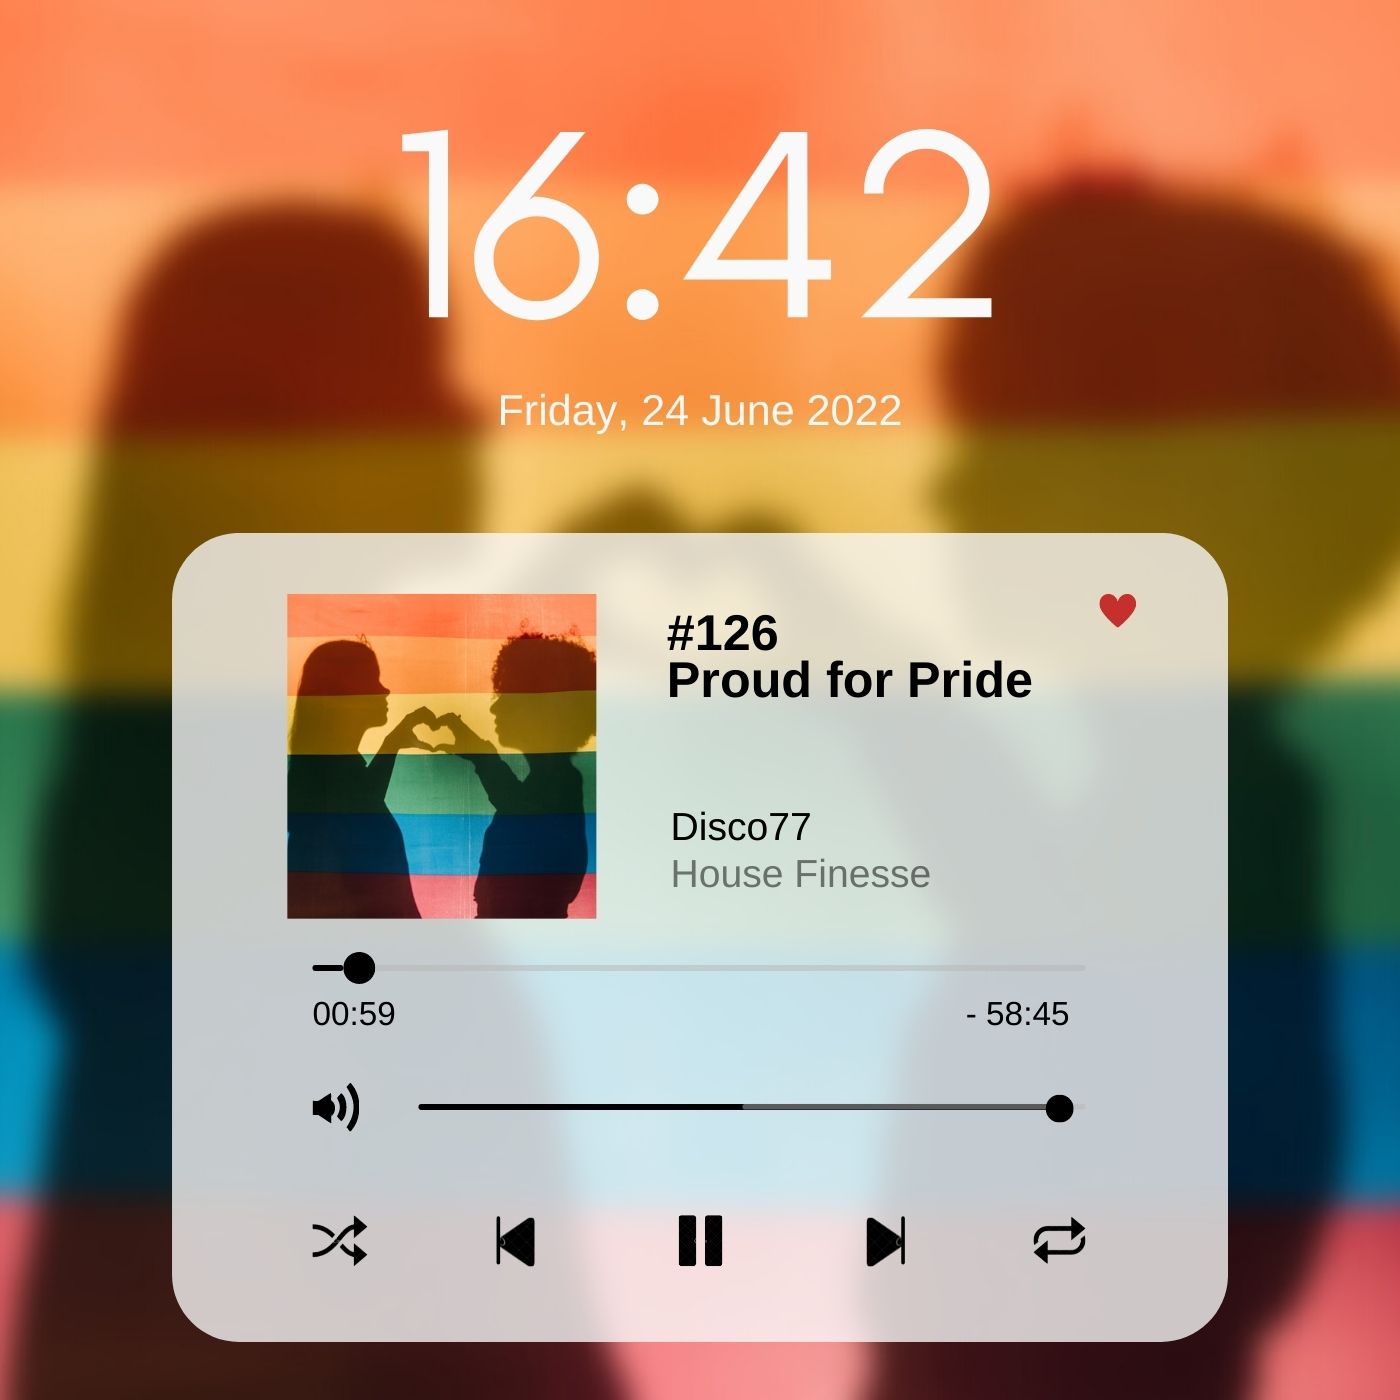 Proud for Pride with Disco77